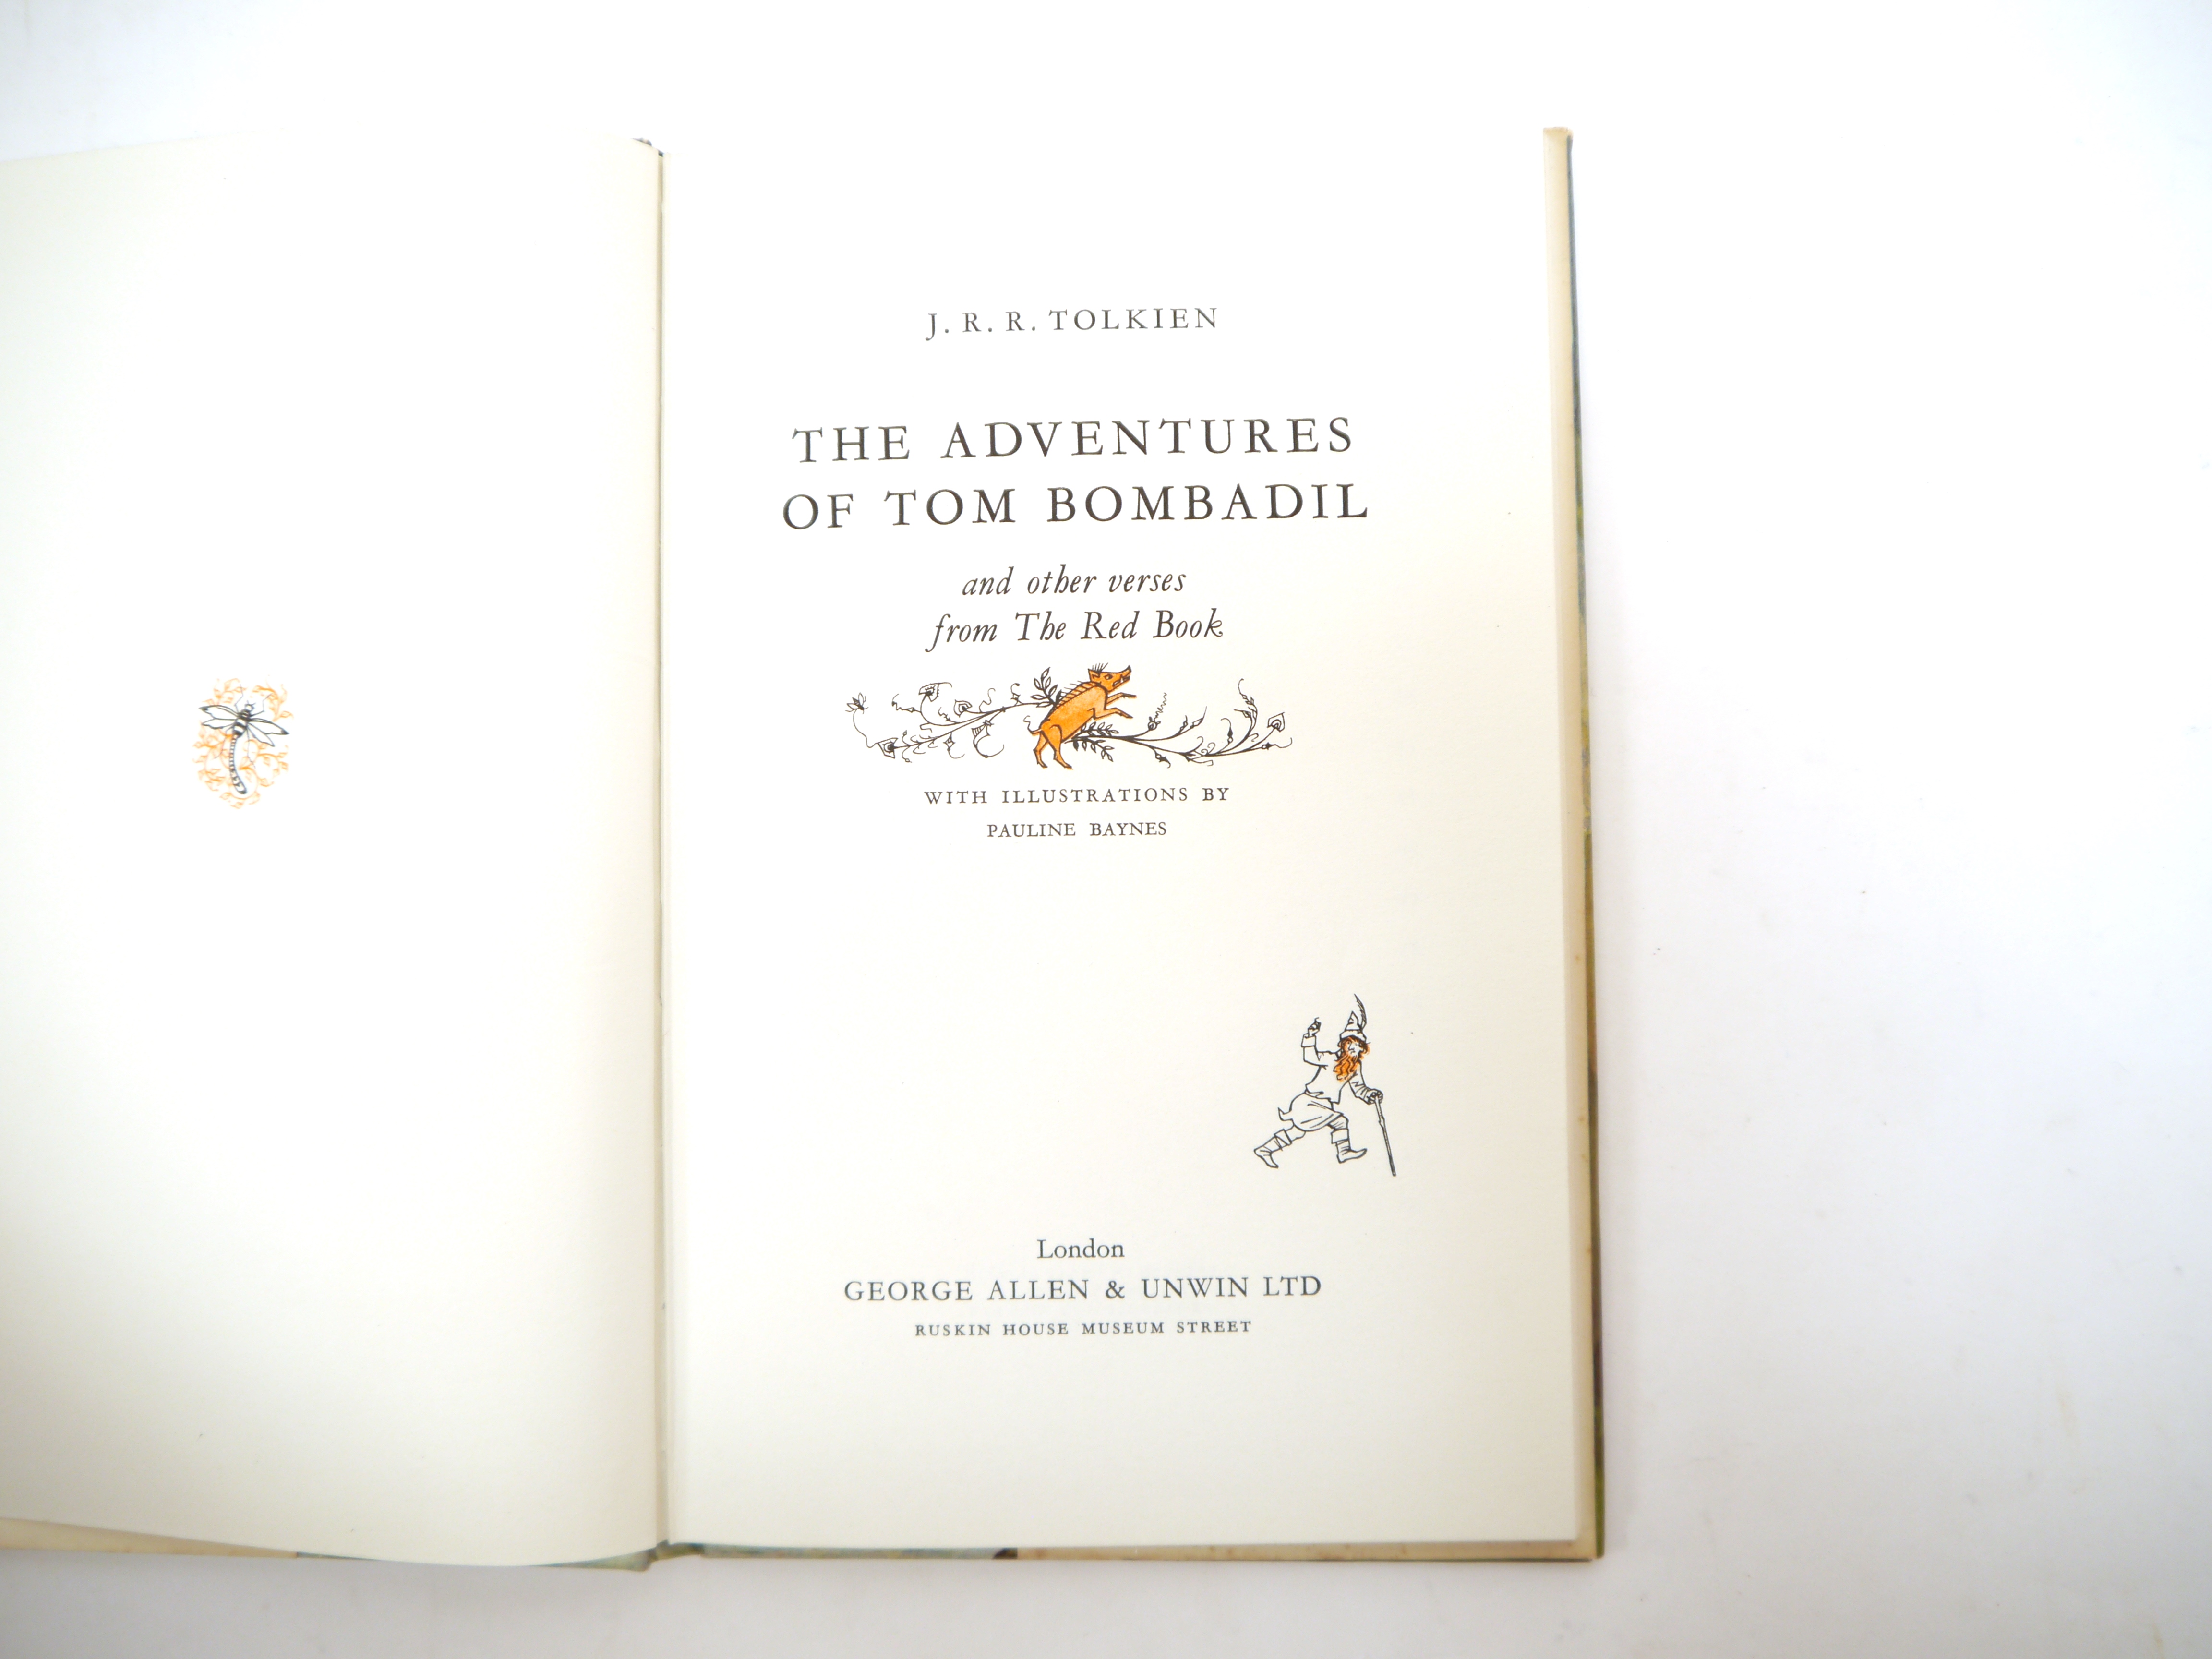 J.R.R. Tolkien: 'The Adventures of Tom Bombadil', London, George Allen & Unwin, 1962, 1st edition, - Image 2 of 5